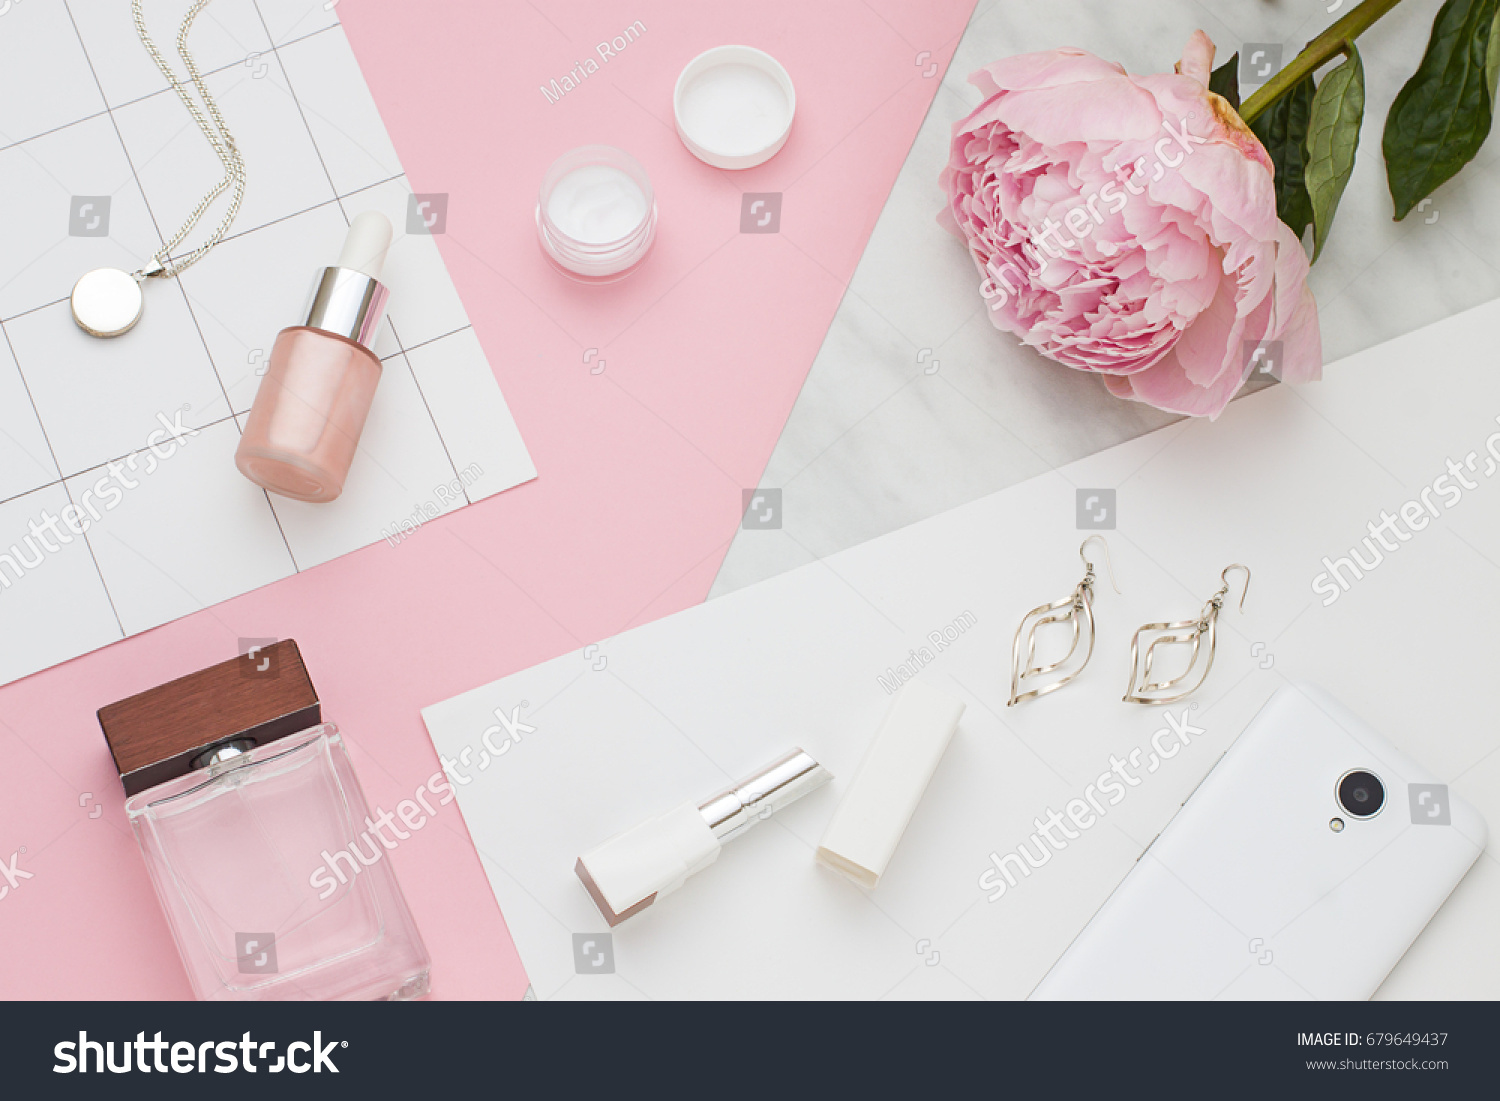 Beauty flat lay with cosmetic bottles, phone and flower. Top view #679649437